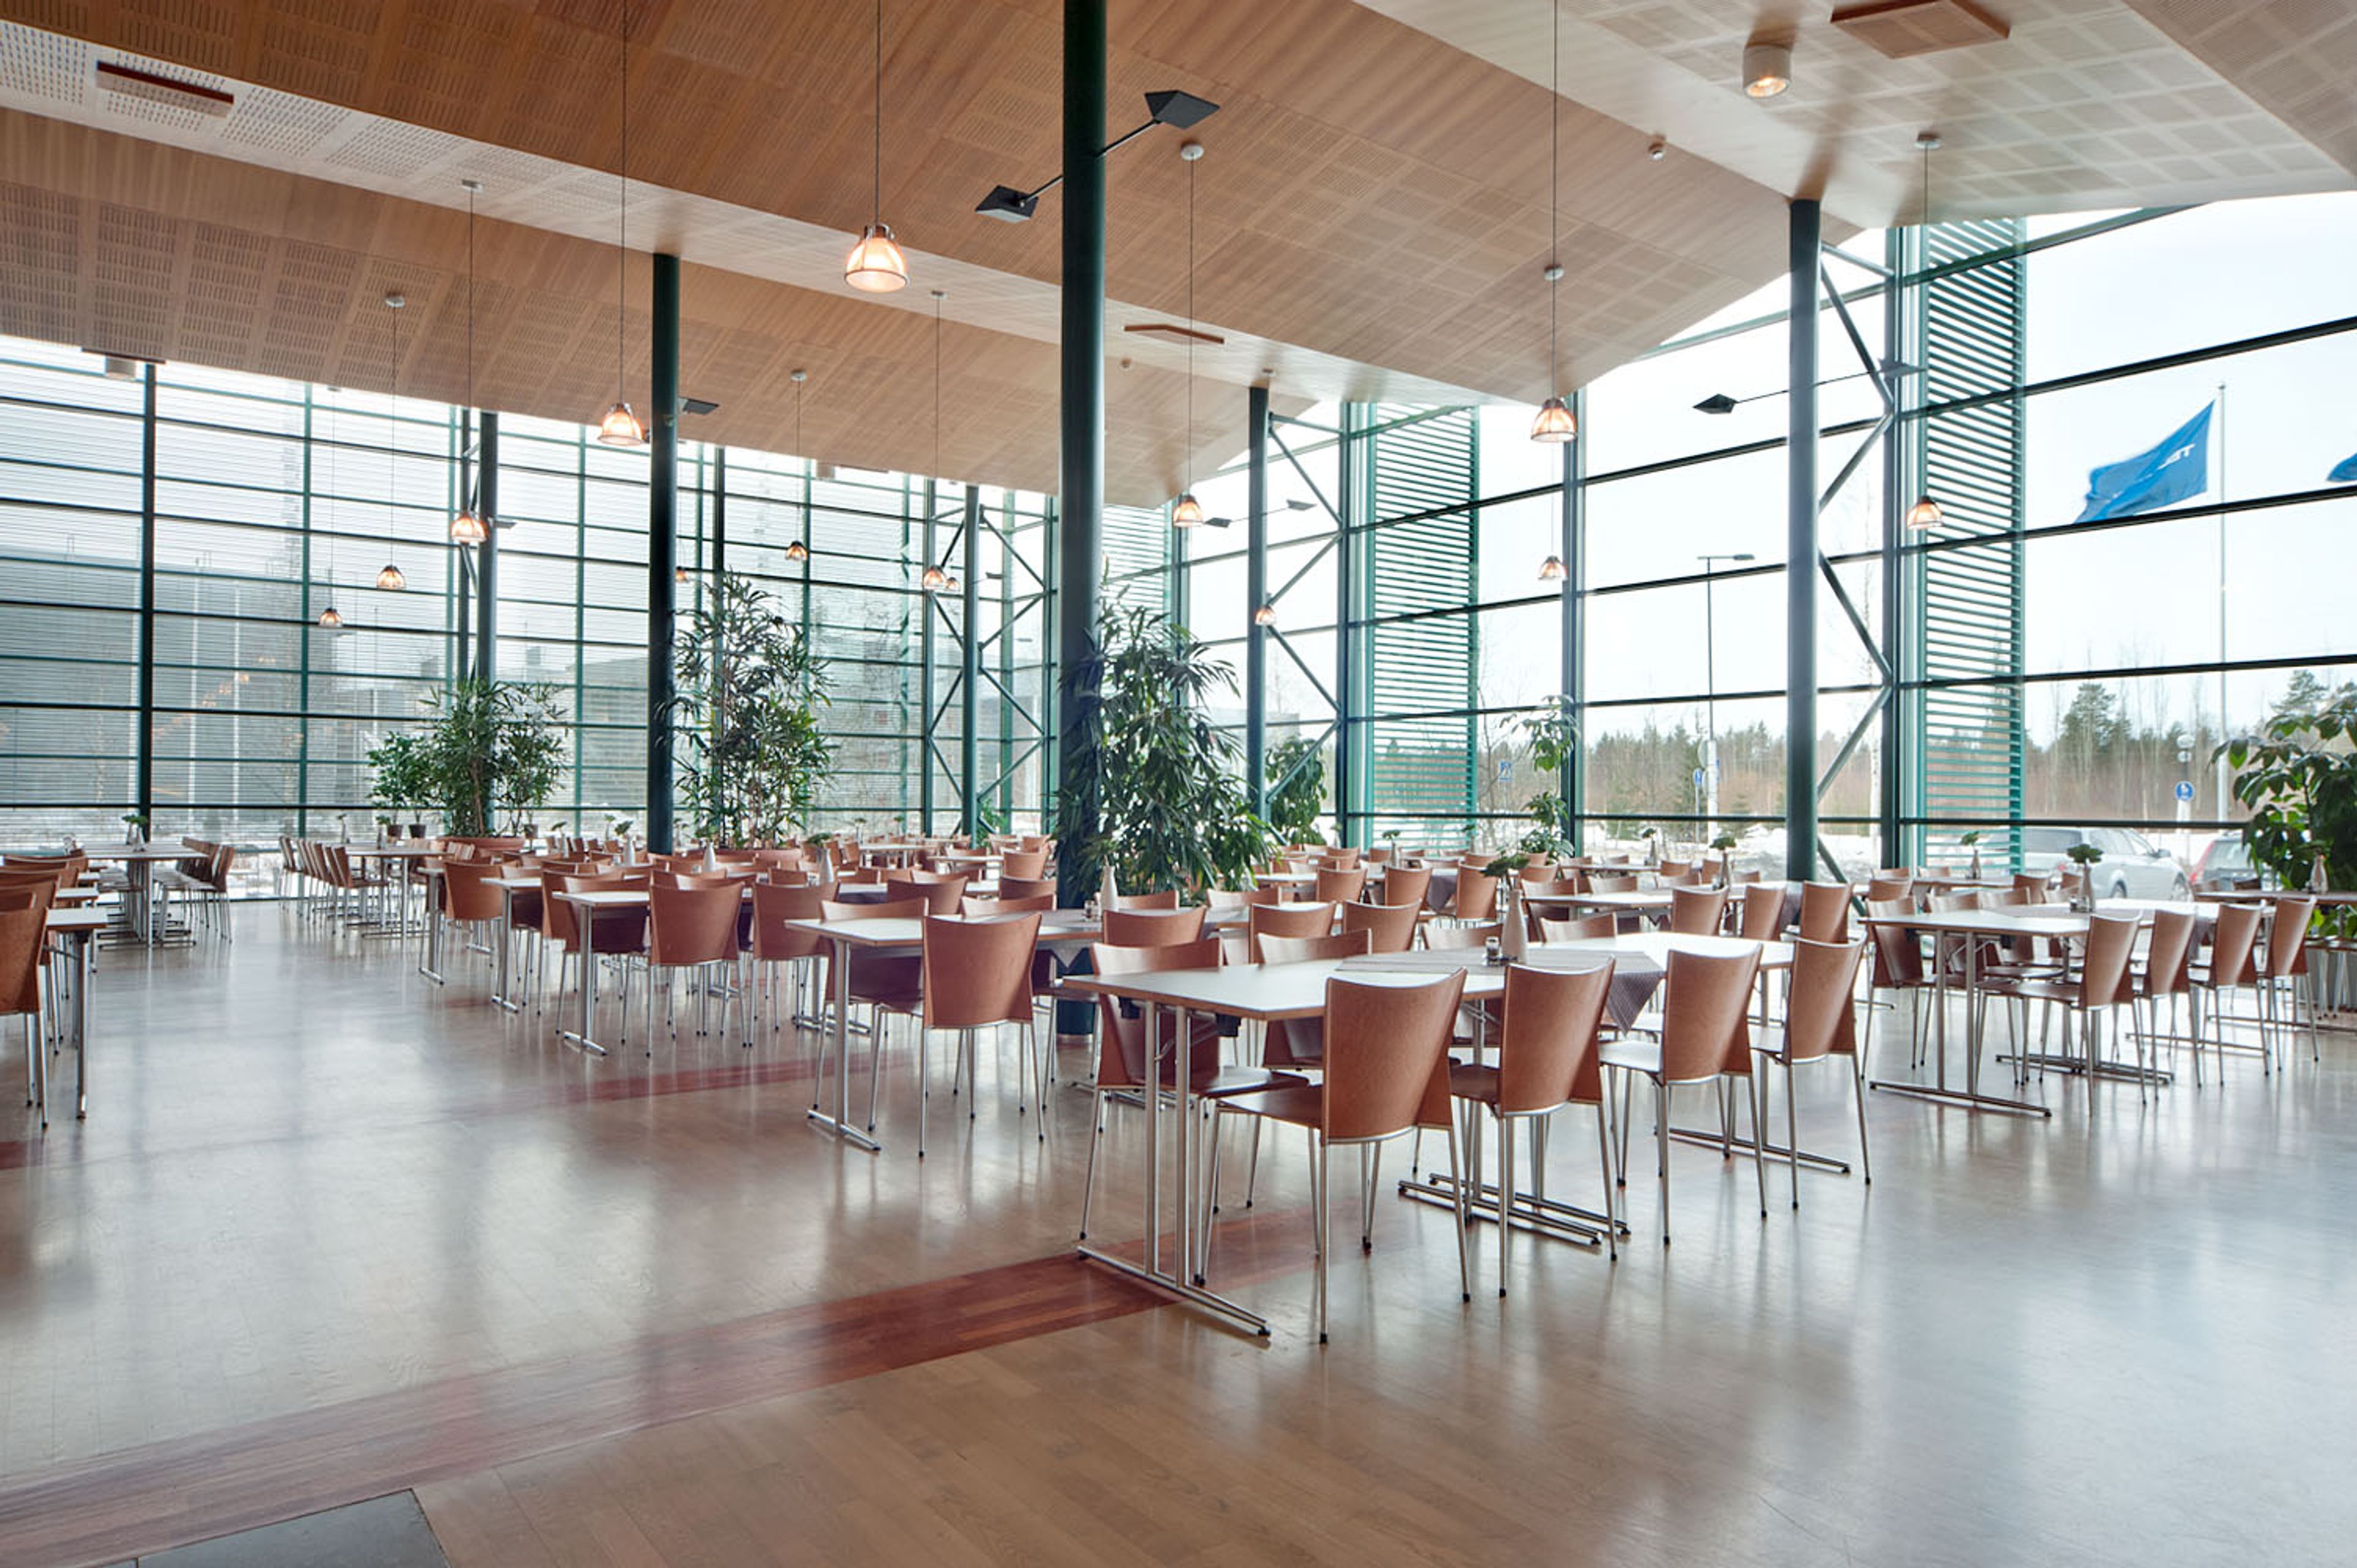 A grand, open room with tables and chairs. The walls are made of glass, the ceiling is high and vaulted. The chairs and tables are a soft brown.